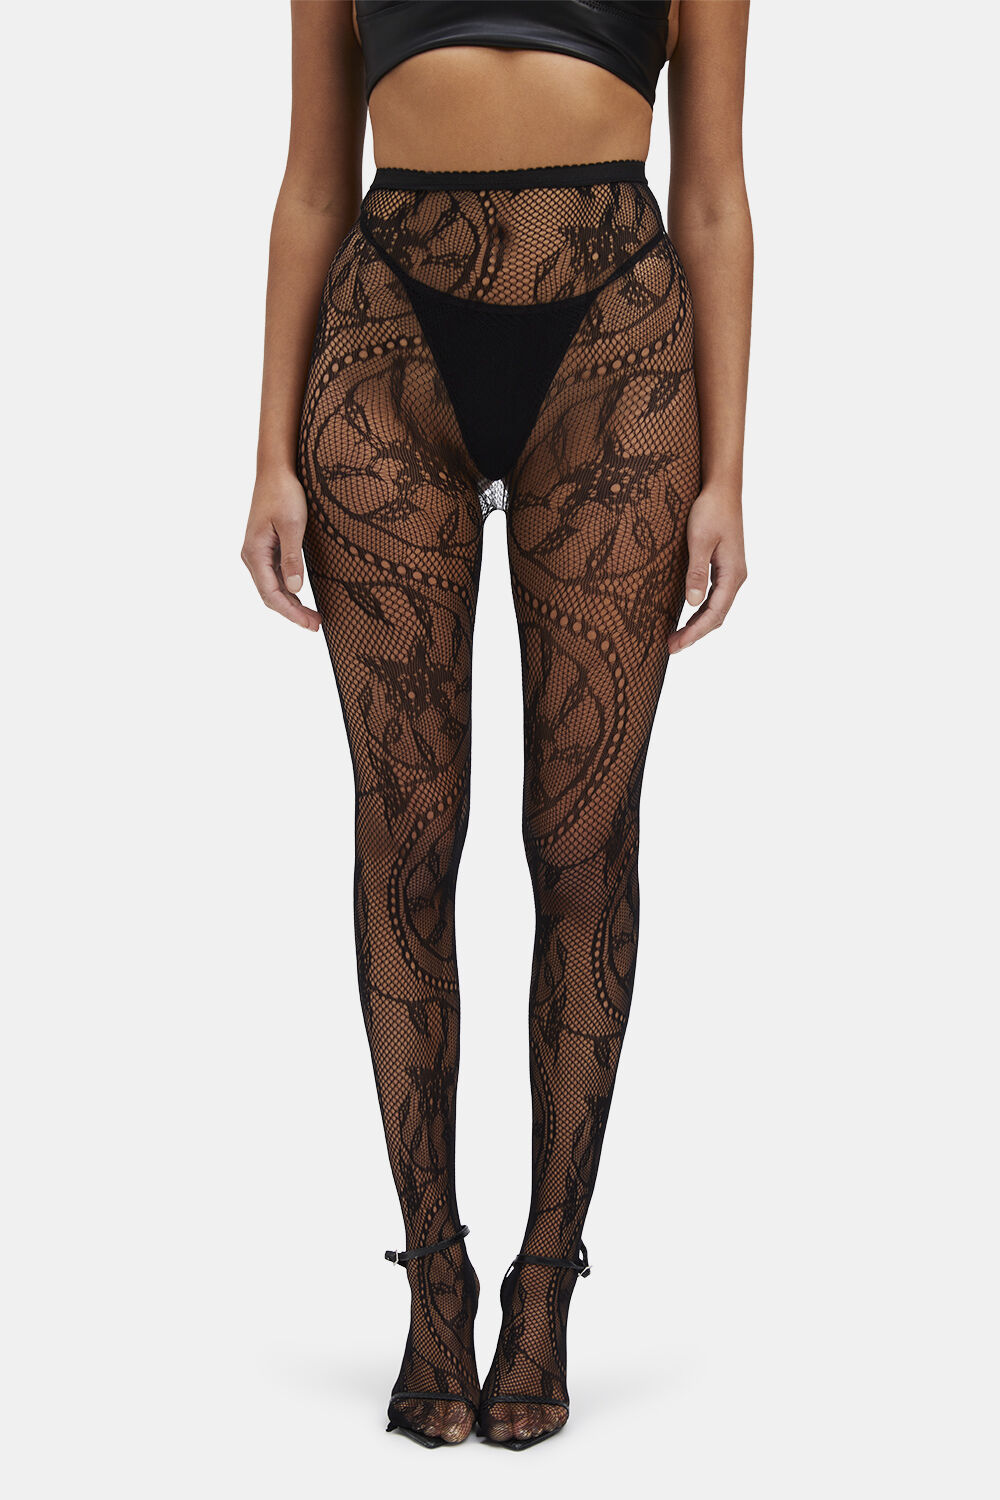 OPAQUE LACE TIGHTS in colour METEORITE